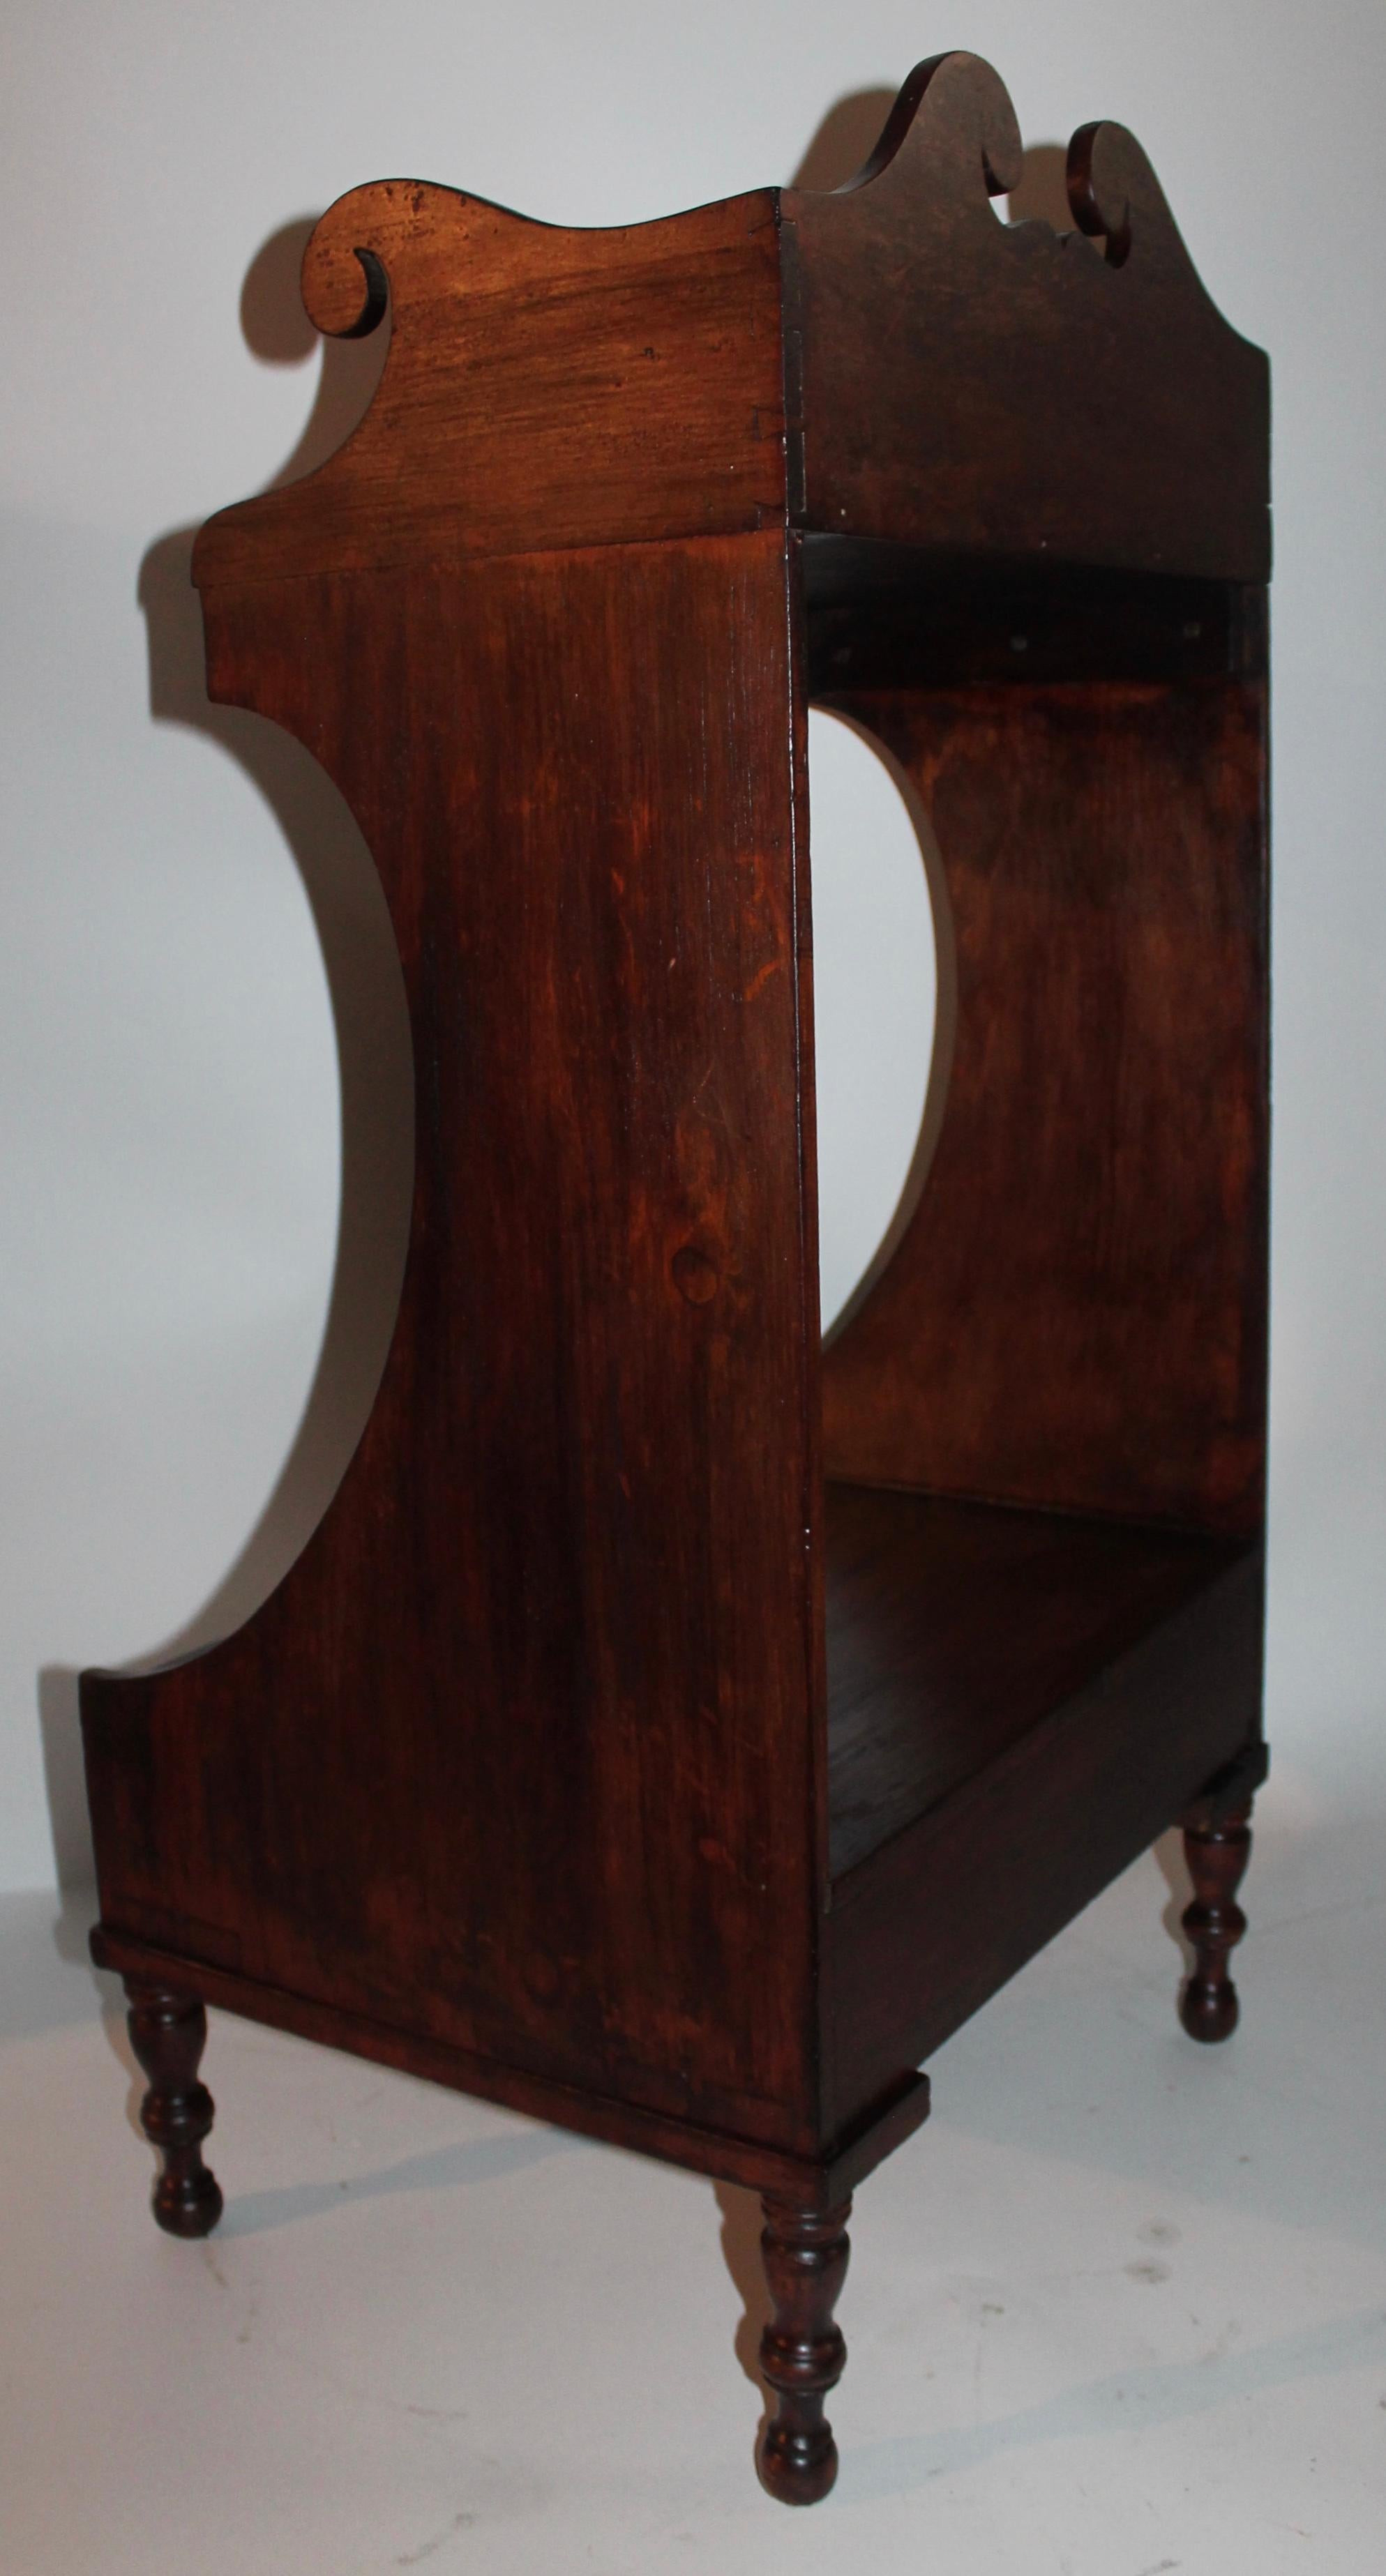 19th century side table with dovetailed case and lower casing as well. It retains a old stained surface and all original hardware. The cutout are amazing and quite unusual. The condition is very good and sturdy. Makes a great side table or